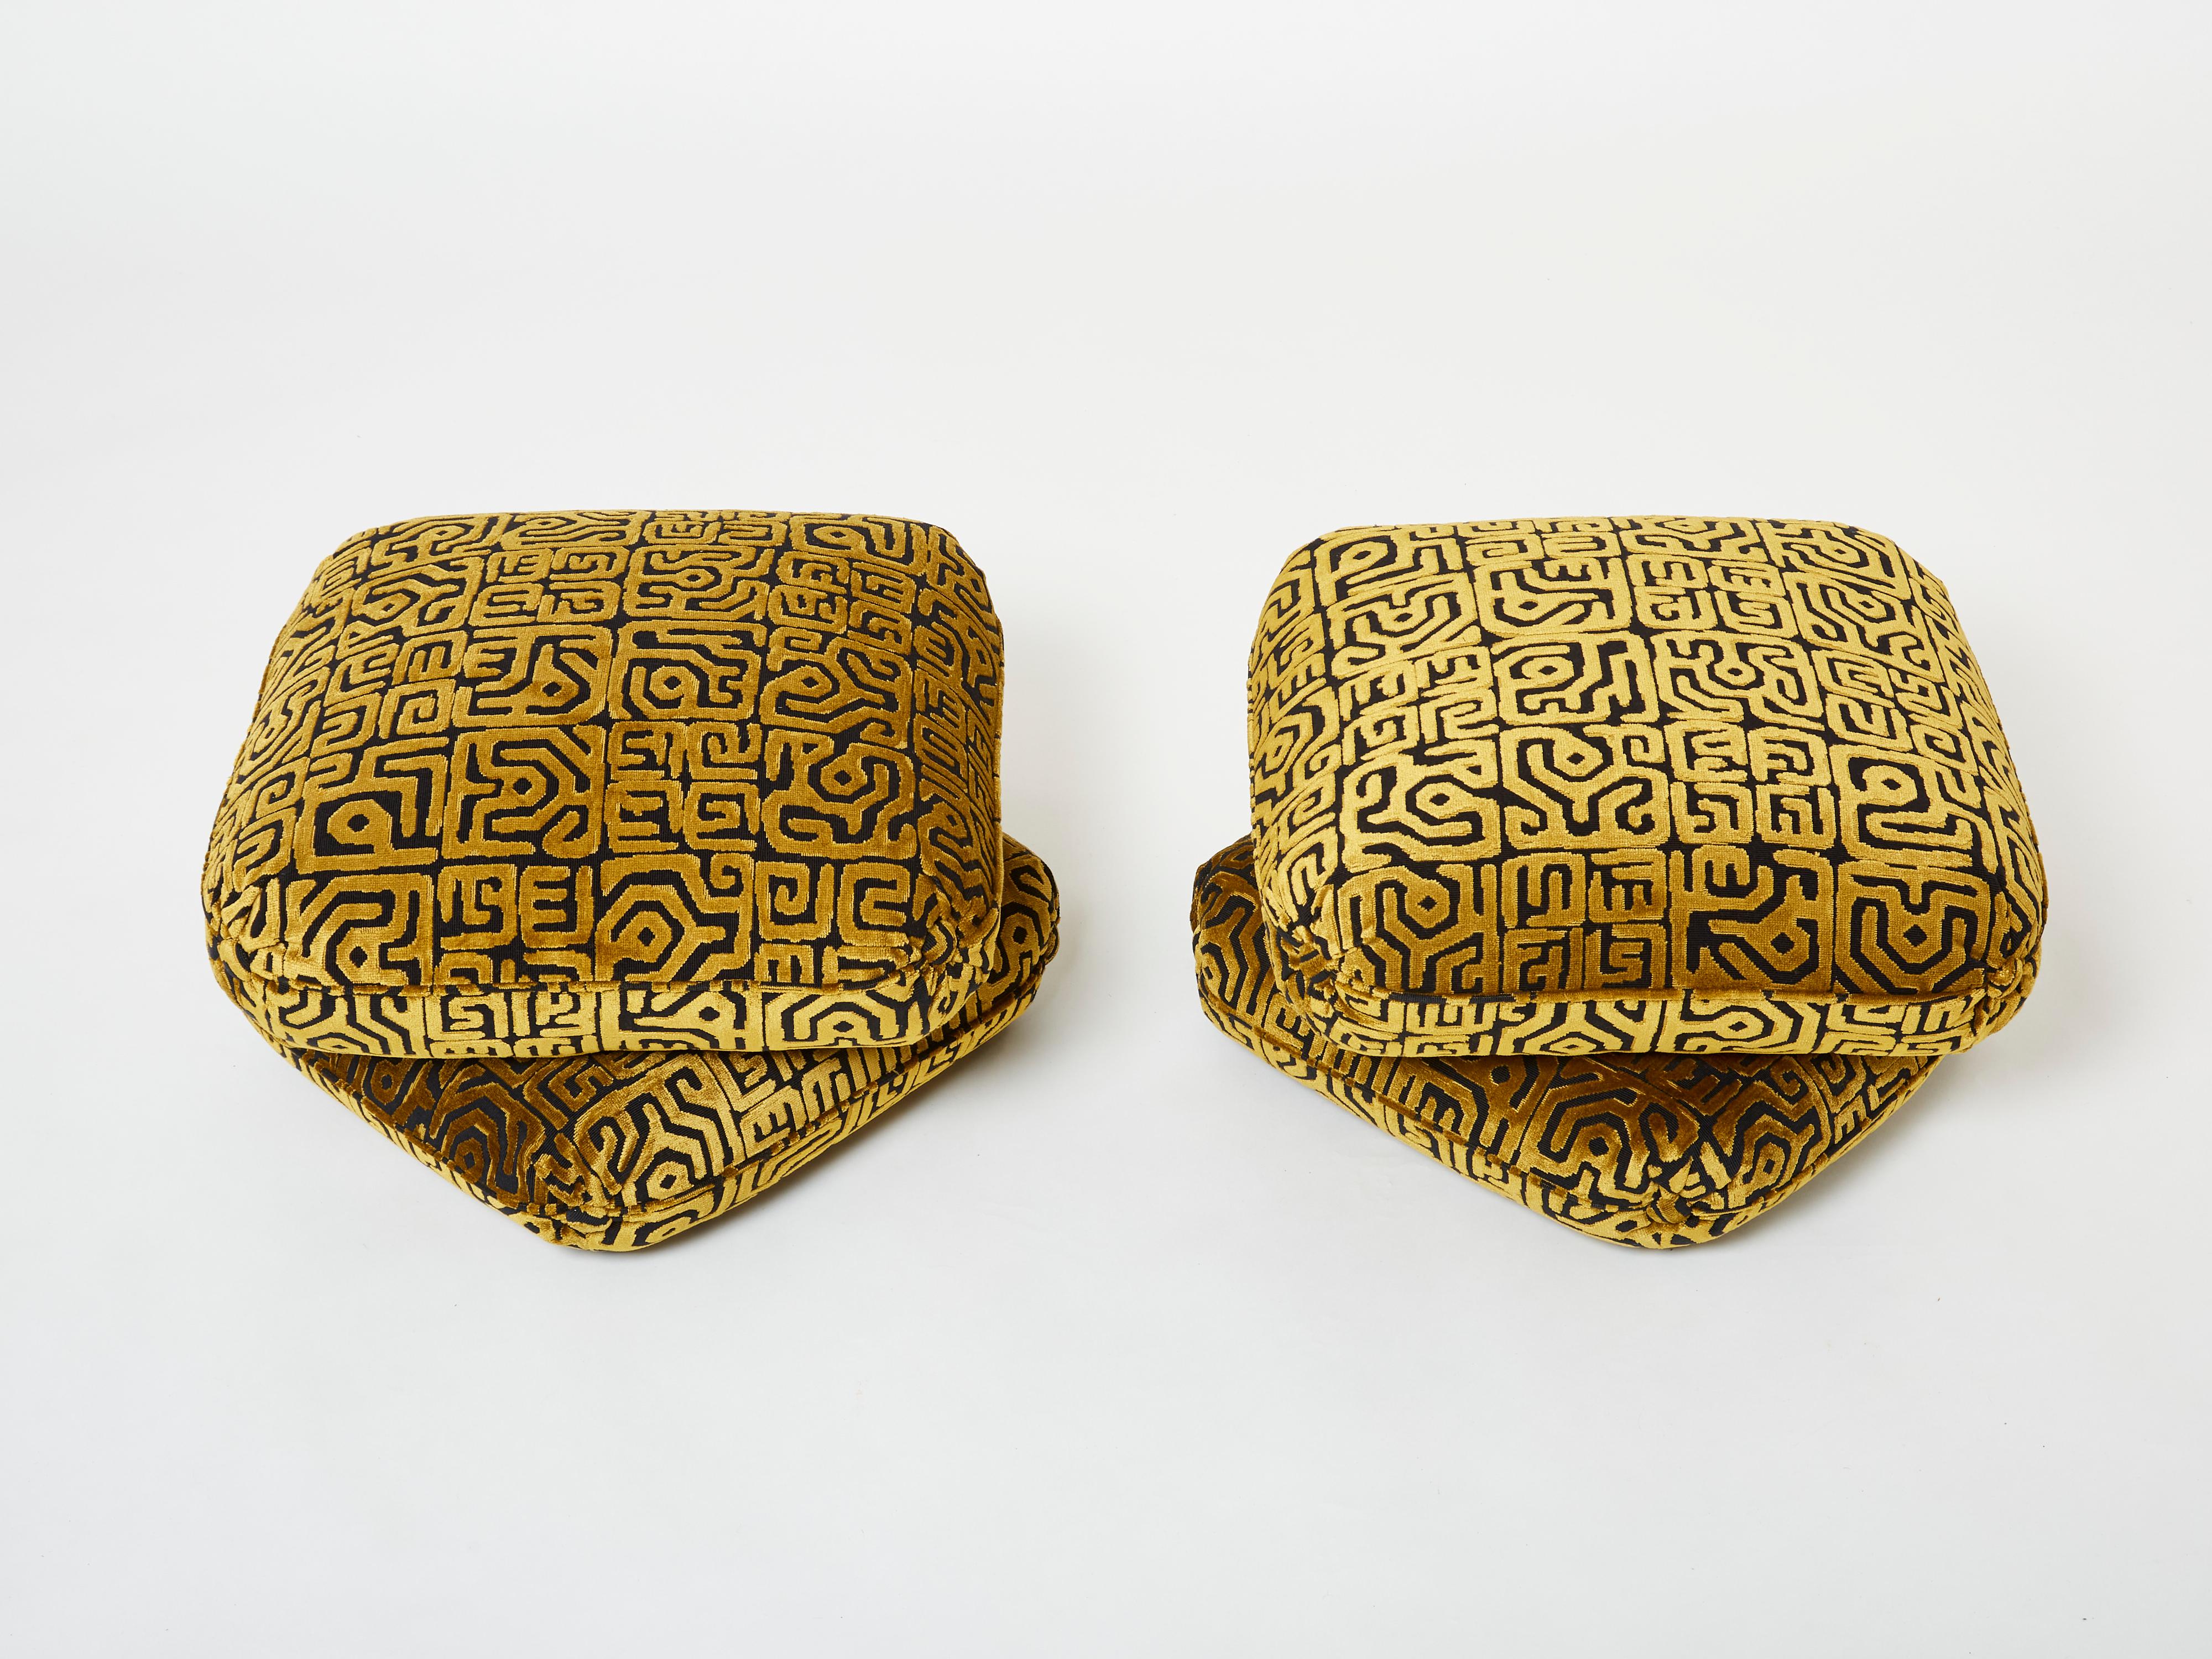 Beautiful pair of ottomans or stools by French Designer Jacques Charpentier for Maison Jansen designed in the 1970s. The stools poufs are made of two large cushion elements connected together. They have been newly upholstered with a beautiful wool